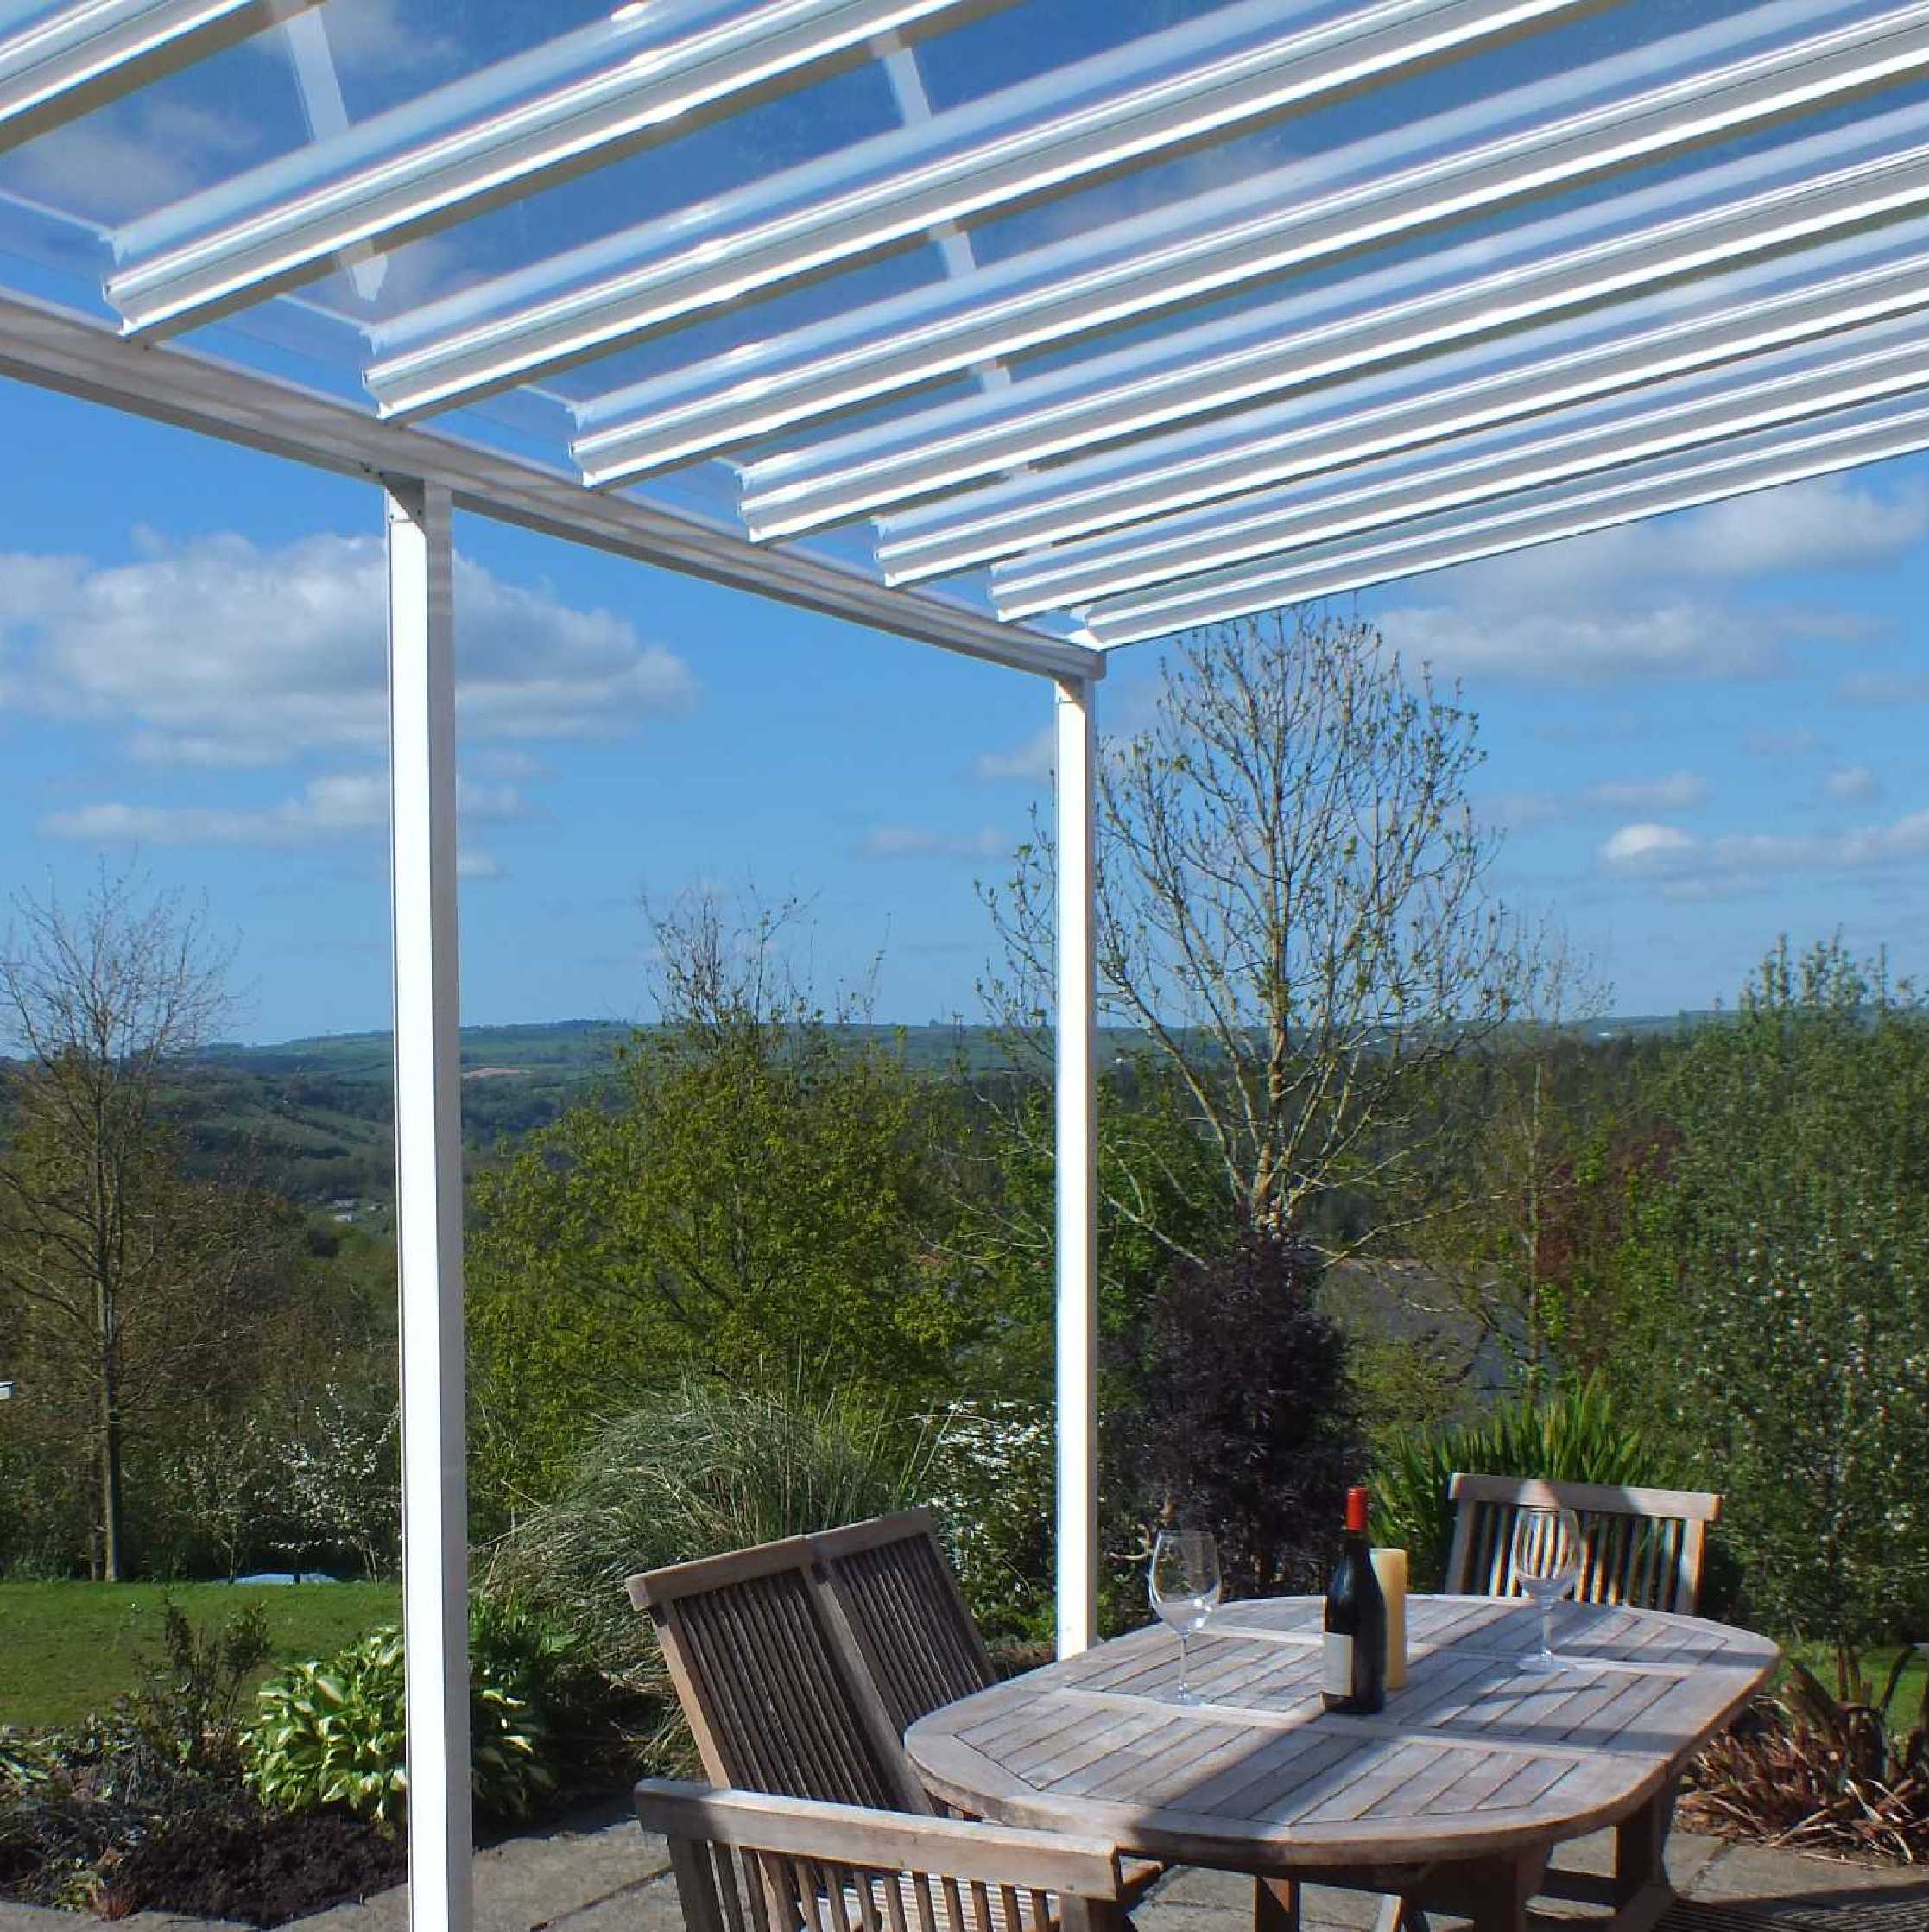 Buy Omega Smart Lean-To Canopy, White UNGLAZED for 6mm Glazing - 7.0m (W) x 1.5m (P), (4) Supporting Posts online today